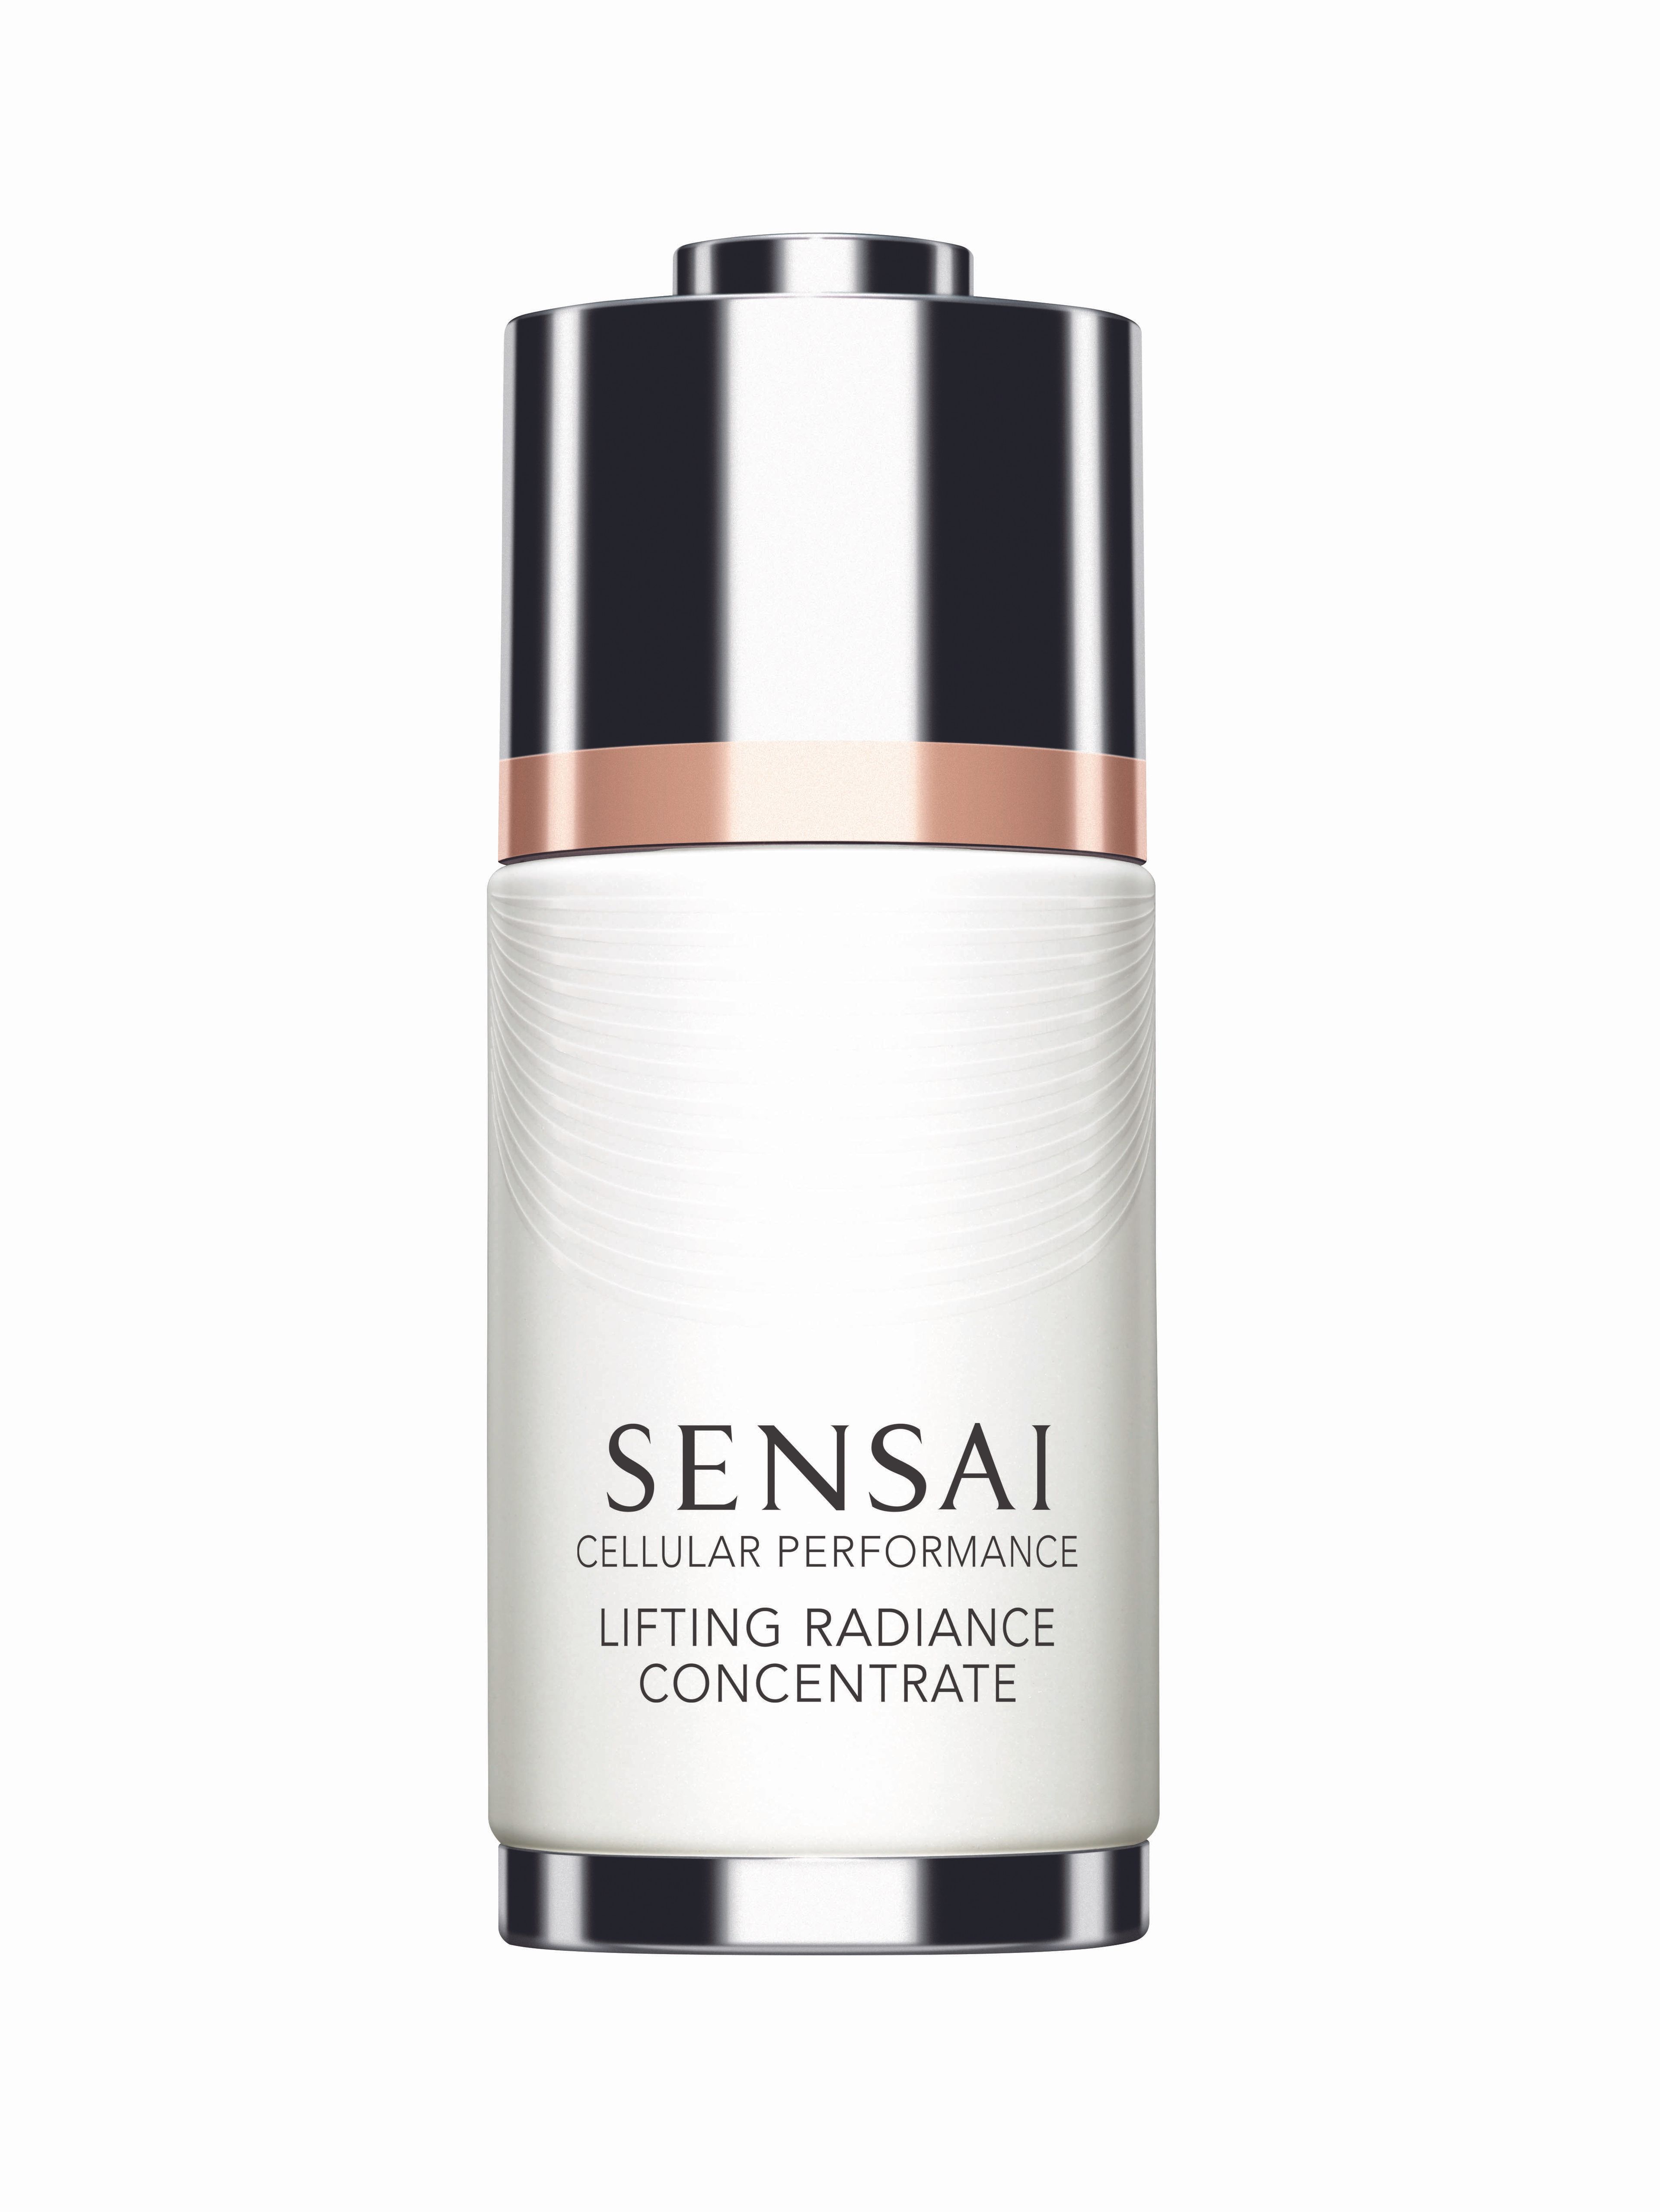 Sensai Lifting Radiance Concentrate 1